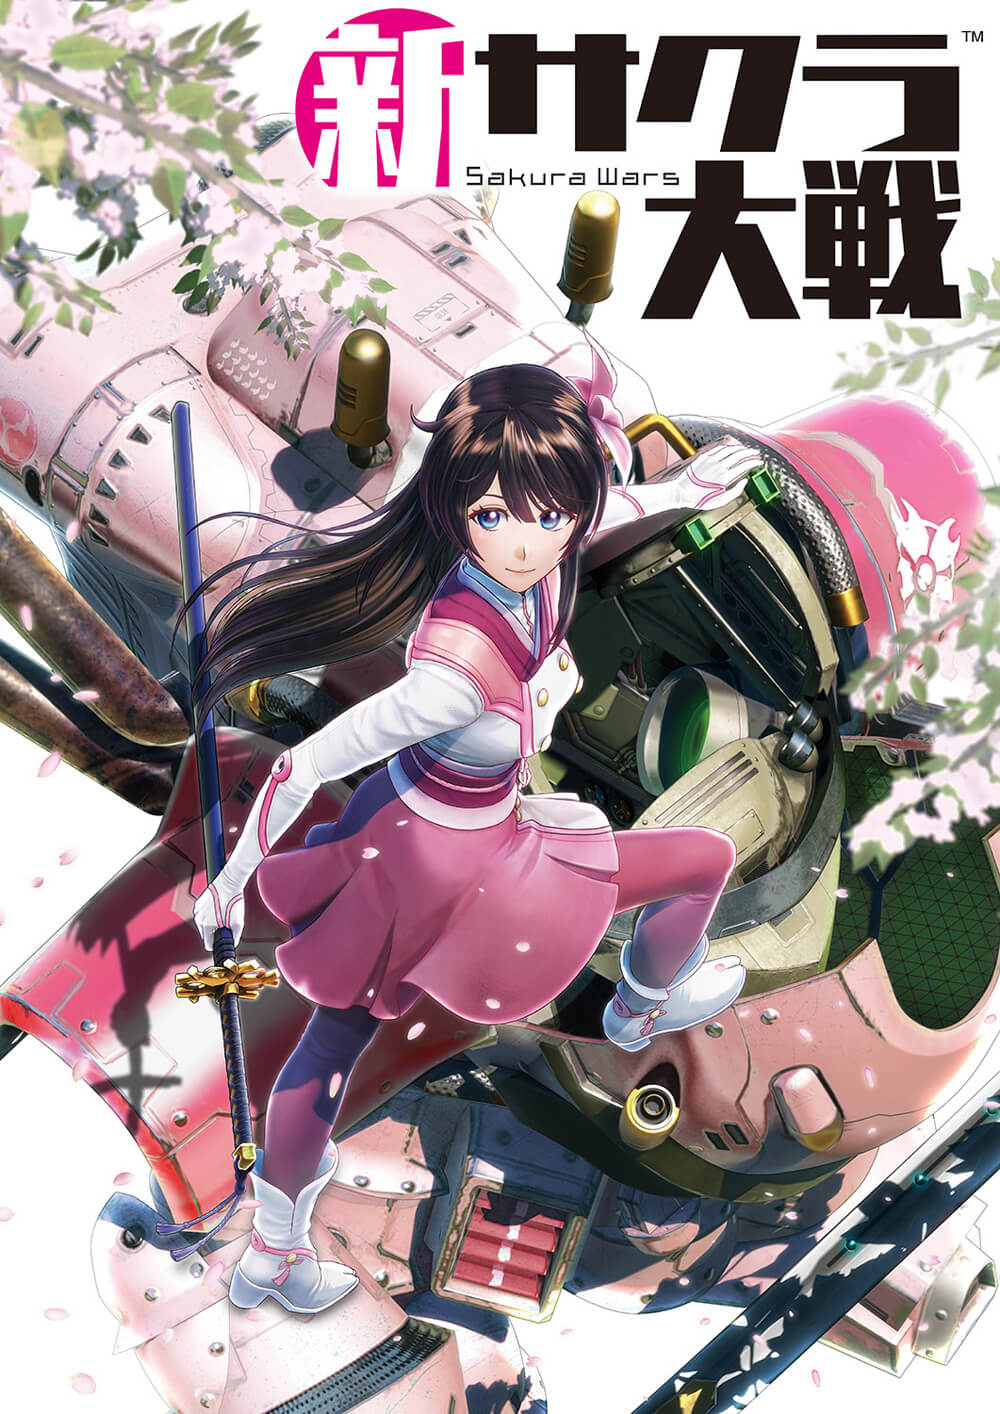 PlayStation®4 Game Project Sakura Wars to Get Anime Series in 2020